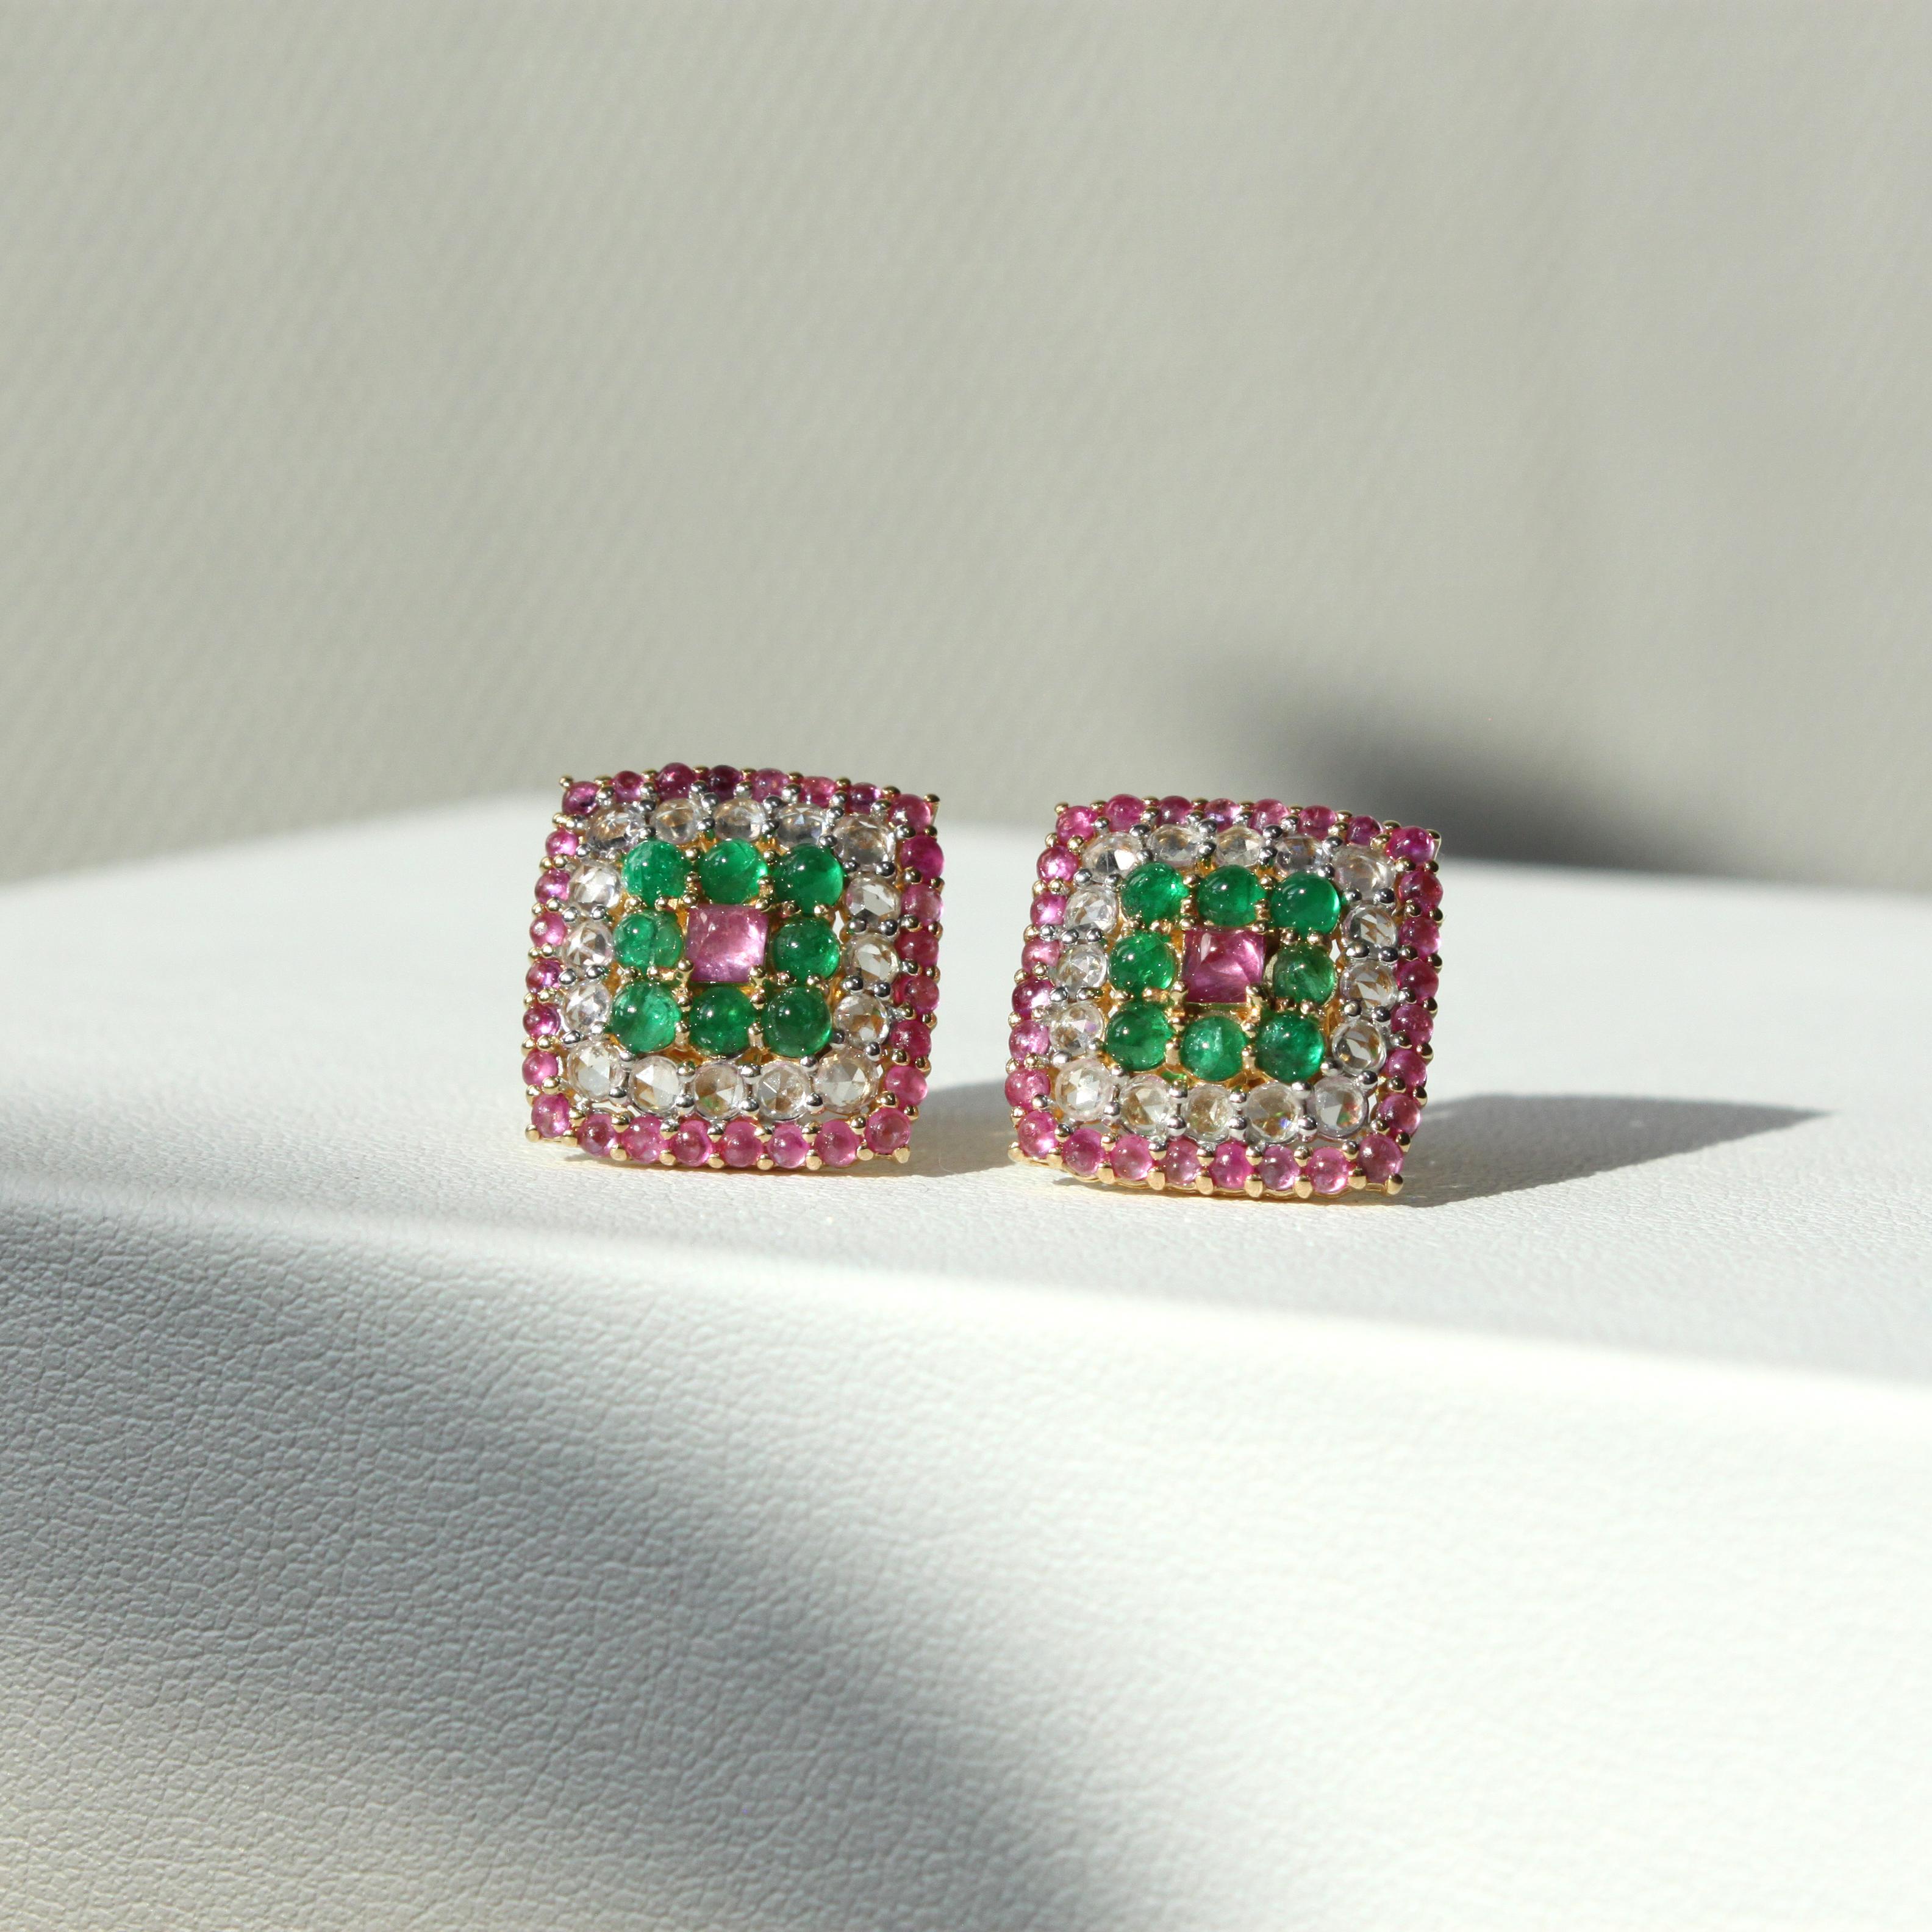 Contemporary Luxe Rectangular Earrings: Pink Sapphire and Emerald Harmony in 14K White Gold For Sale